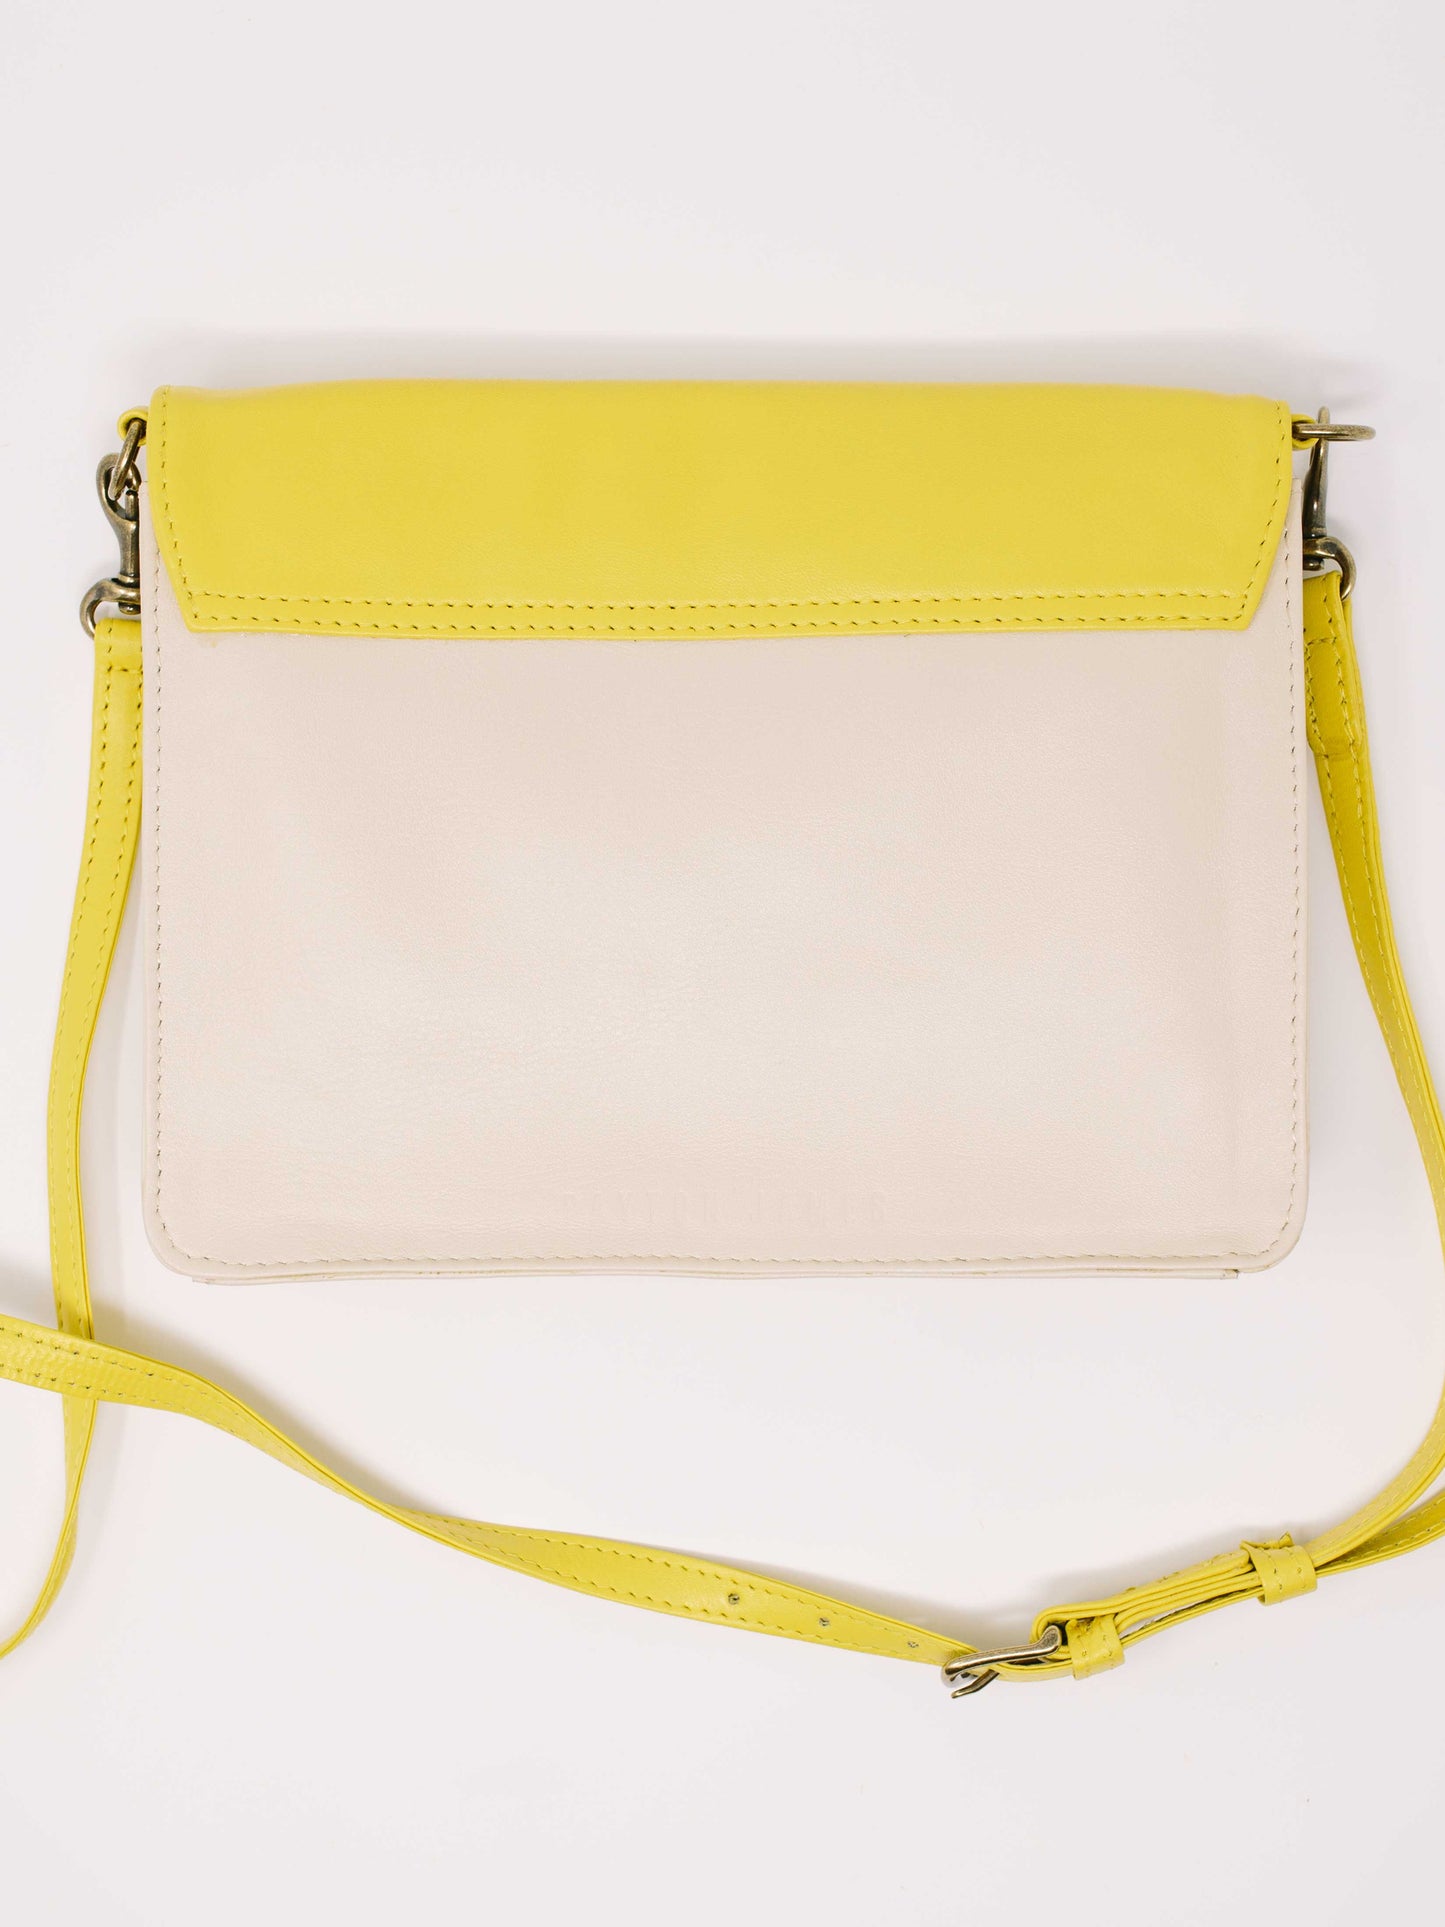 Leather Crossbody Wallet bag lemon and white - back view-crossbody bags by Payton James